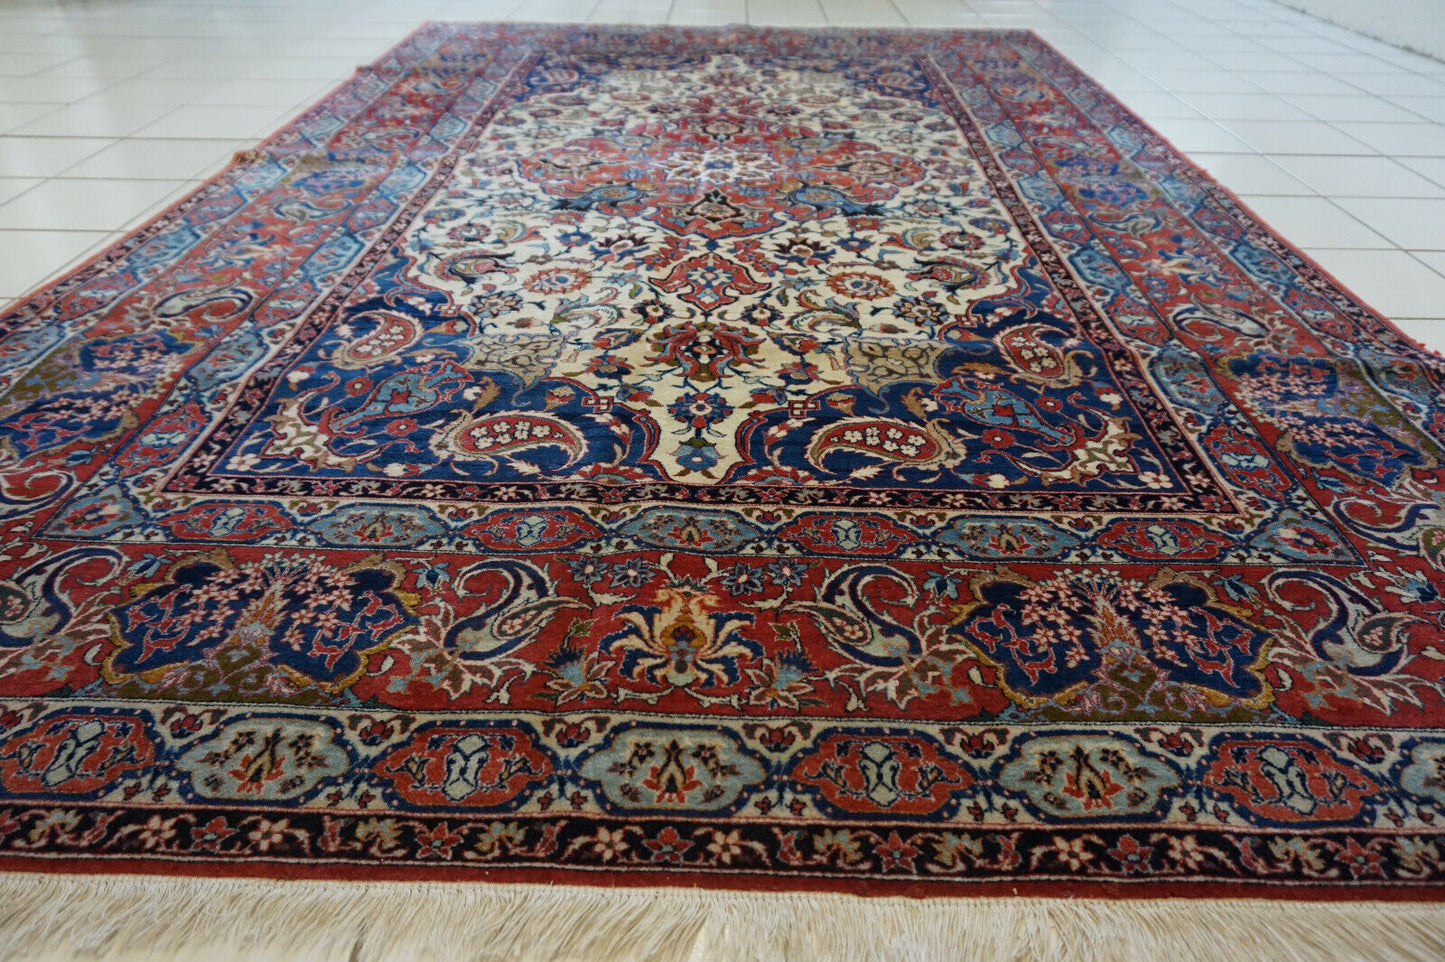 Artistic display of the Handmade Antique Persian Style Isfahan Rug as a room centerpiece